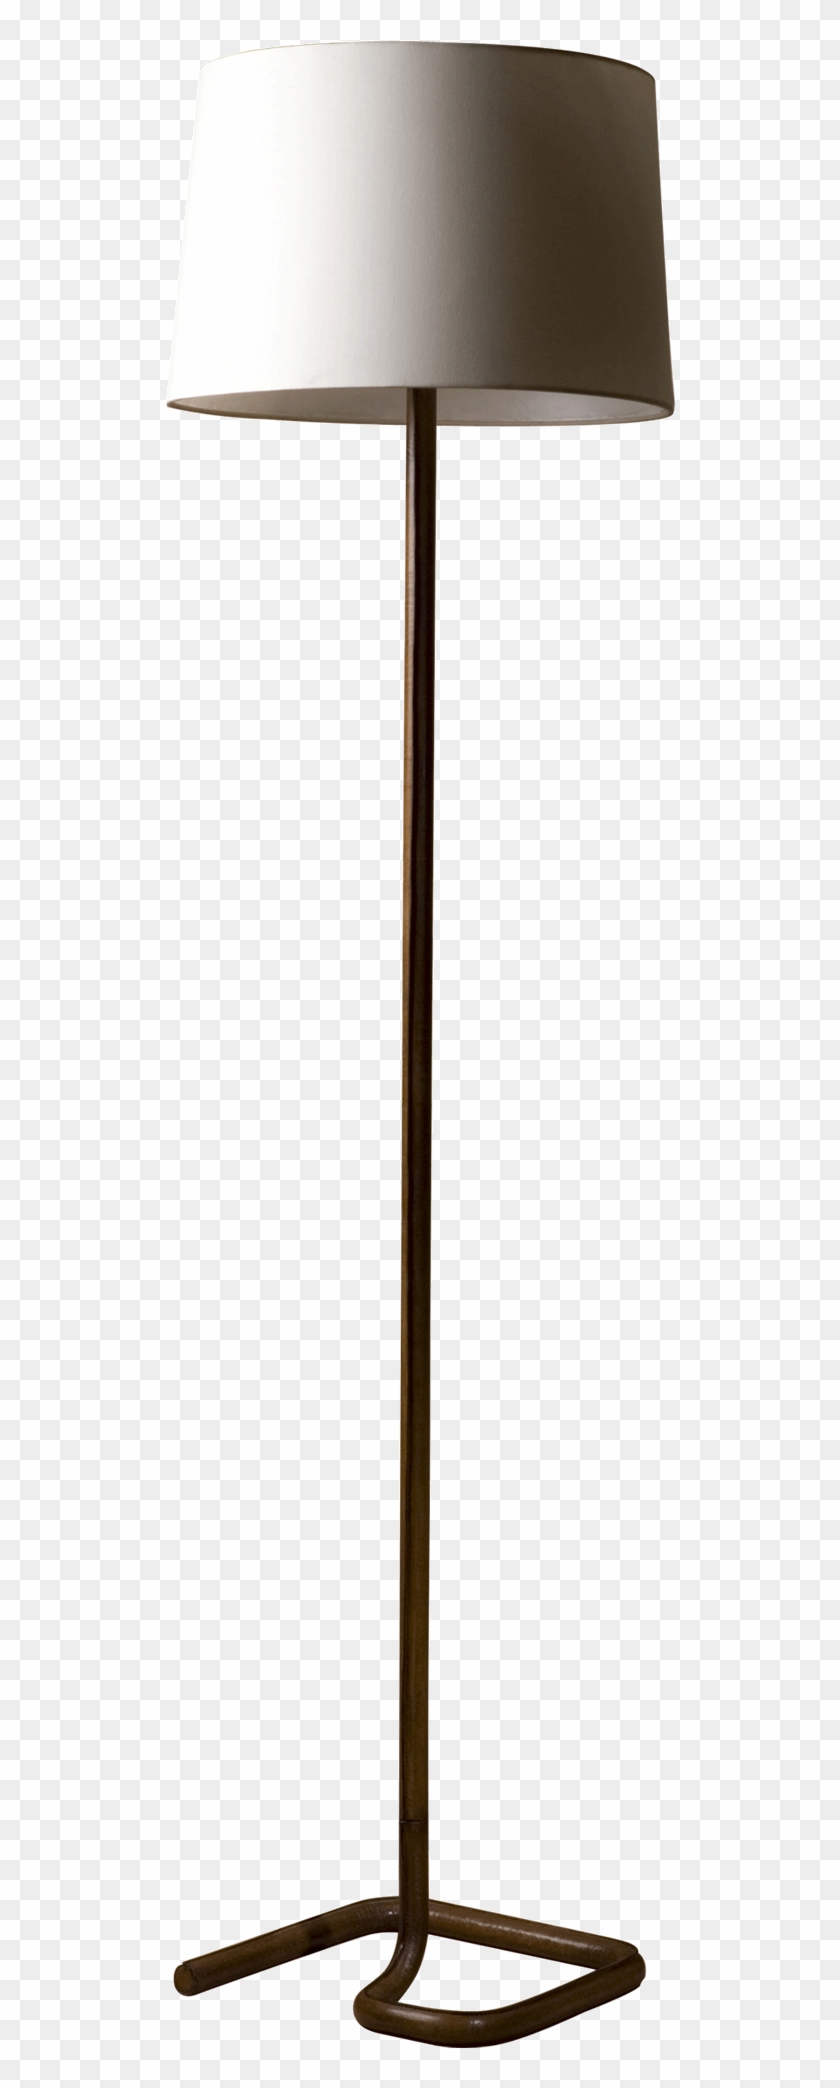 Png Library Library Railway Standing Portsidecaf - Standing Lamp Transparent Clipart